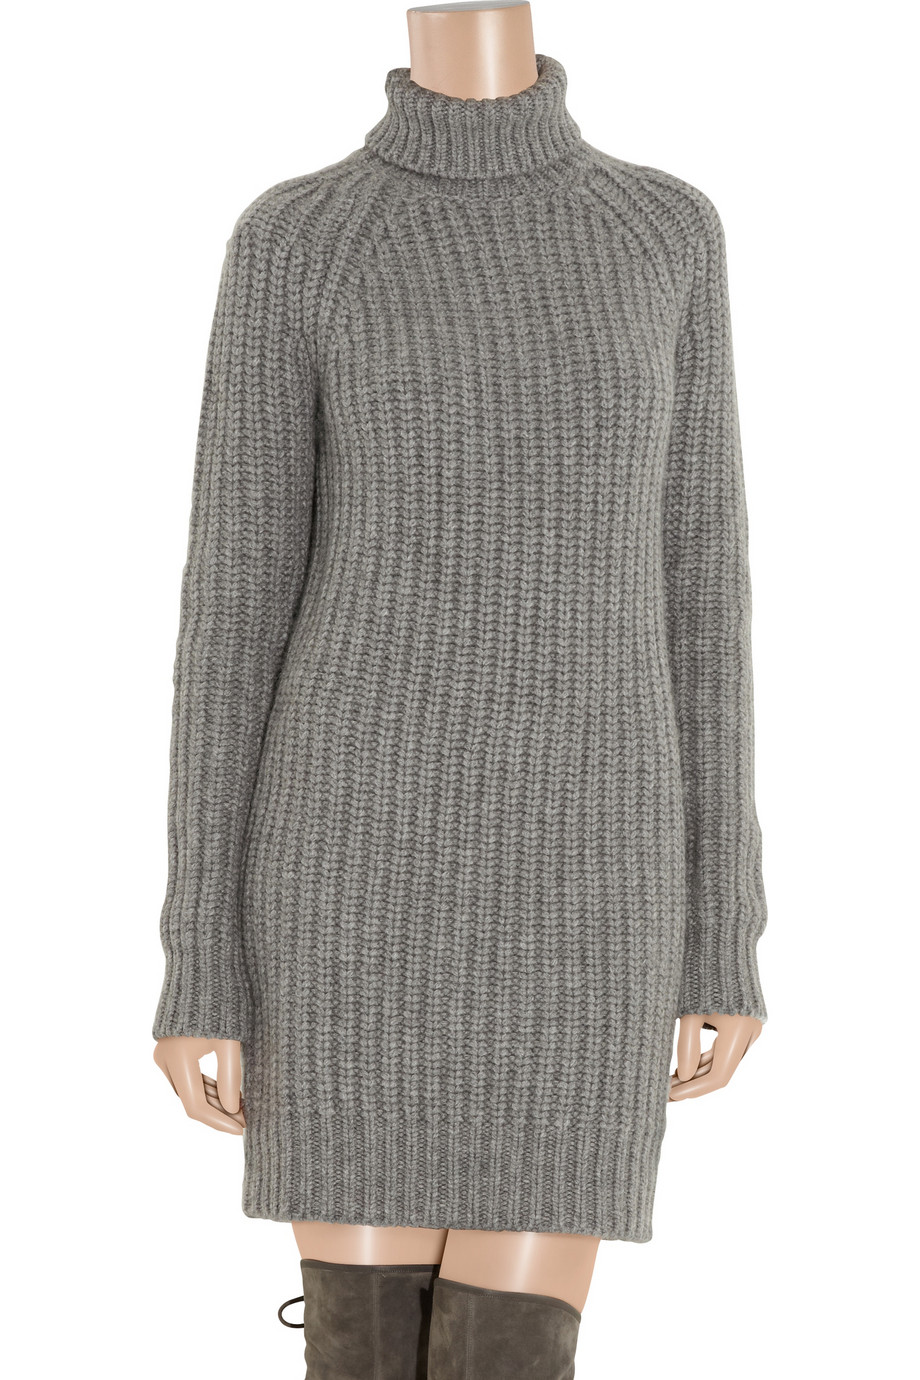 Michael Kors Knitted Cashmere 